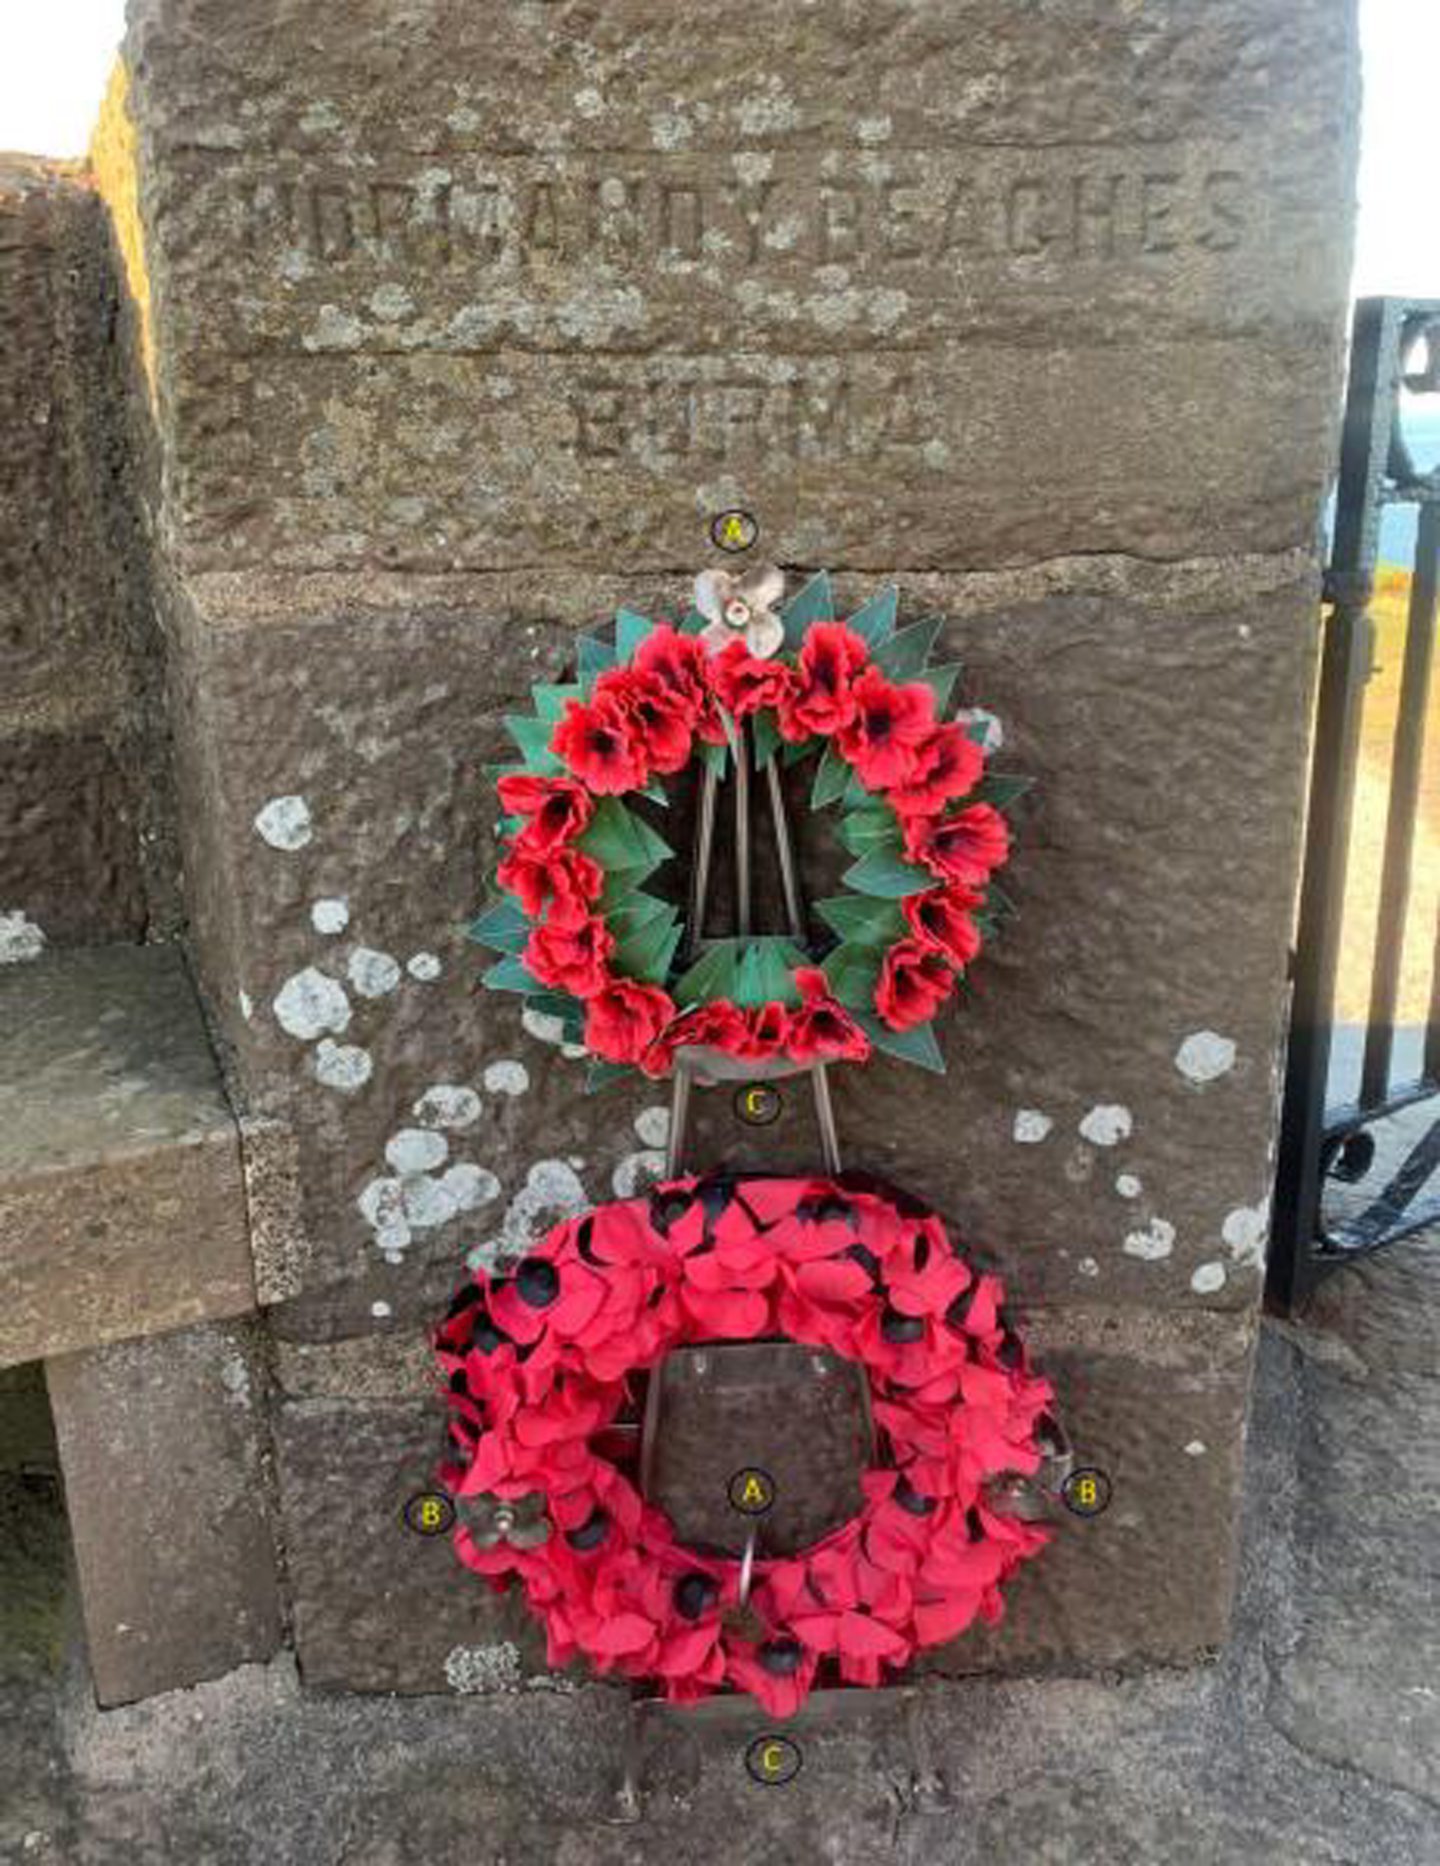 Some of the brackets affixed to the war memorial